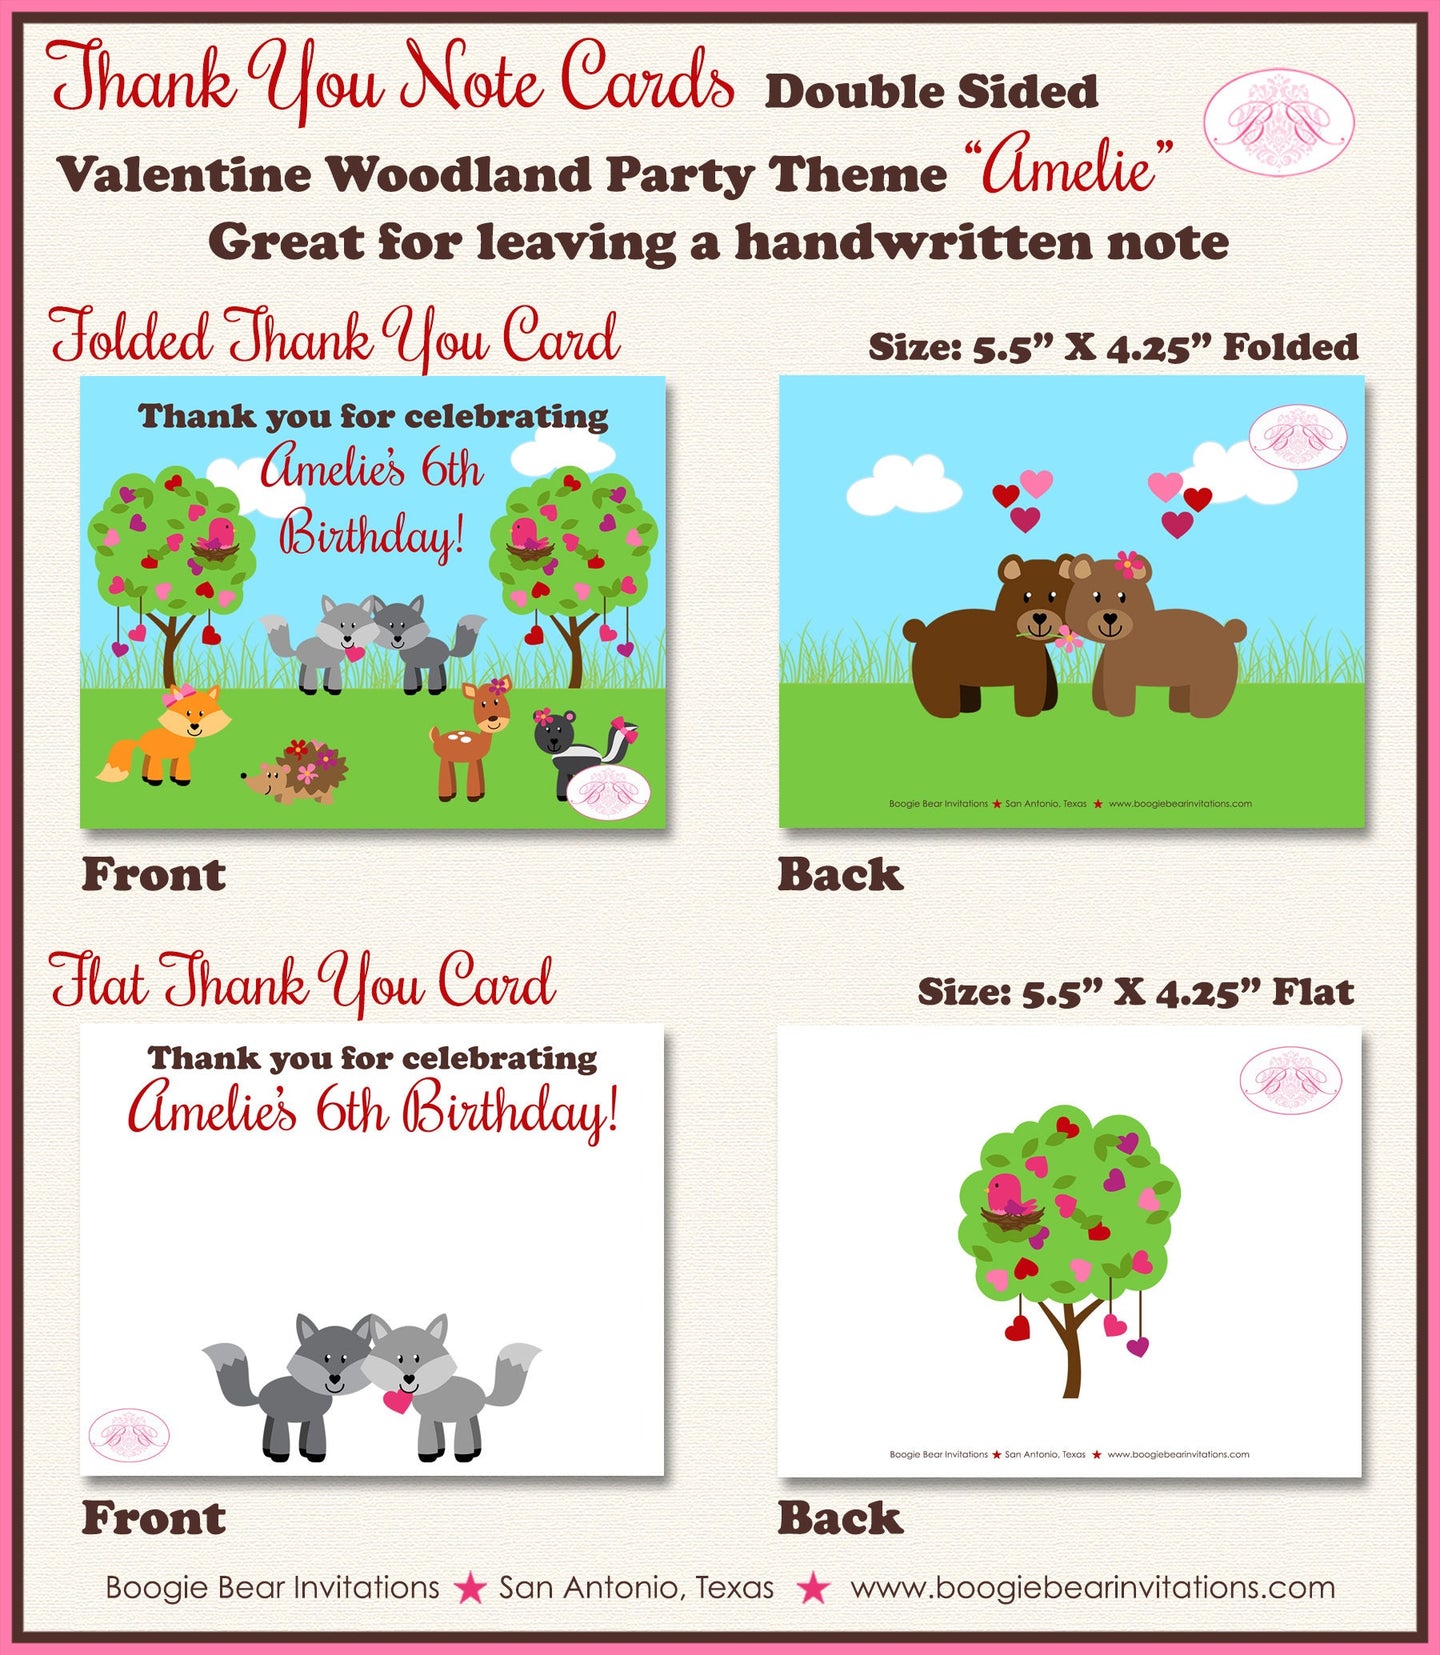 Valentines Day Woodland Party Thank You Card Birthday Girl Boy Forest Red Pink Heart Love Boogie Bear Invitations Amelie Theme Printed